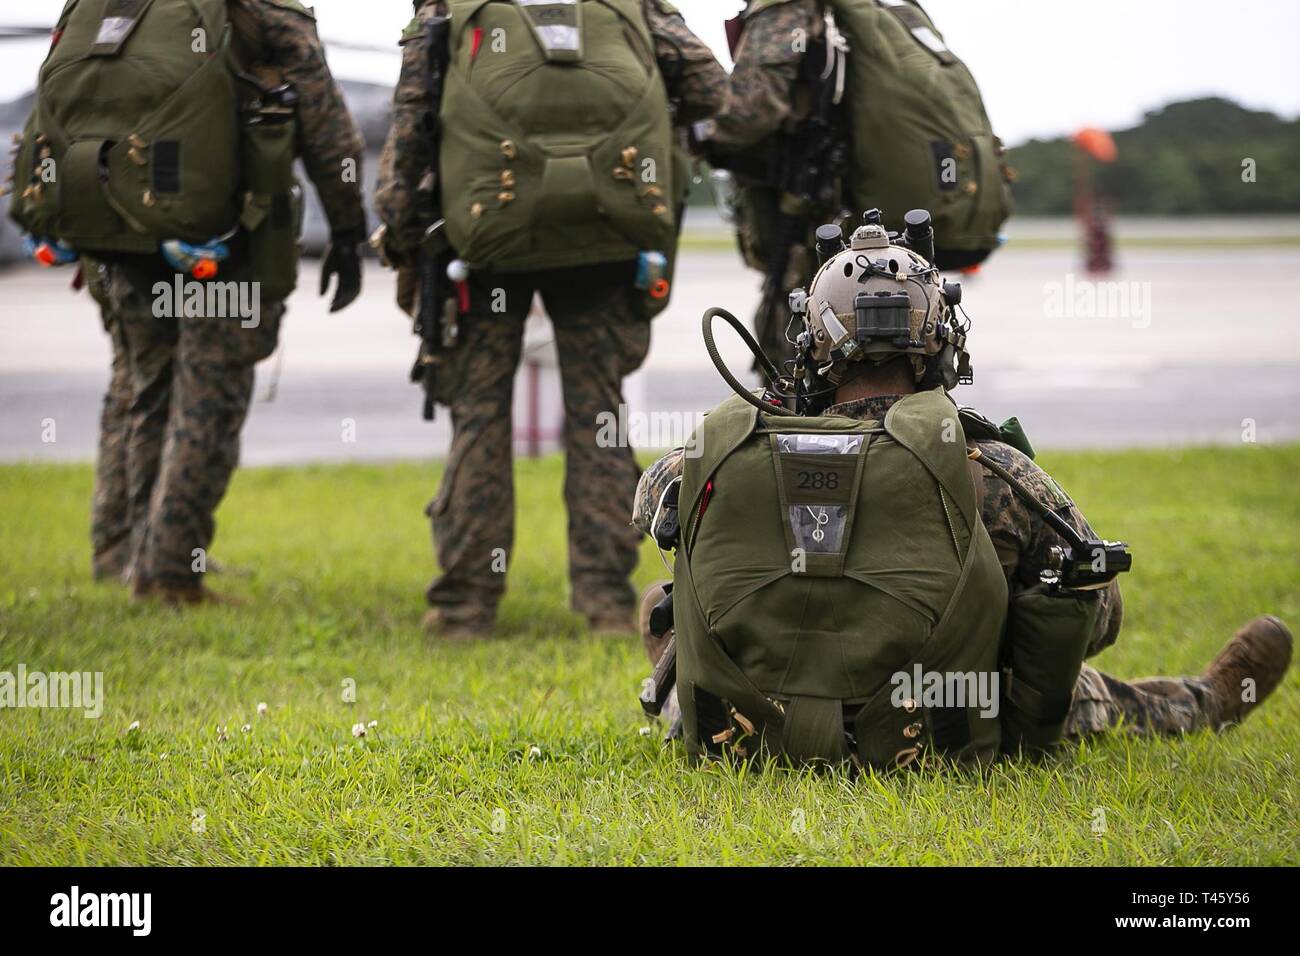 Marines with the 31st Marine Expeditionary Unit's Maritime Raid Force wait to board a helicopter before a military free-fall jump during simulated Expeditionary Advanced Base Operations, Marine Corps Air Station Futenma, Okinawa, Japan, March 11, 2019. Marines with the 31st MEU are conducting simulated EABO in a series of dynamic training events to refine their ability to plan, rehearse and complete a variety of missions. During EABO, the 31st MEU partnered with the 3rd Marine Division, 3rd Marine Logistics Group and 1st Marine Aircraft Wing, and airmen with the U.S. Air Force 353rd Special Op Stock Photo